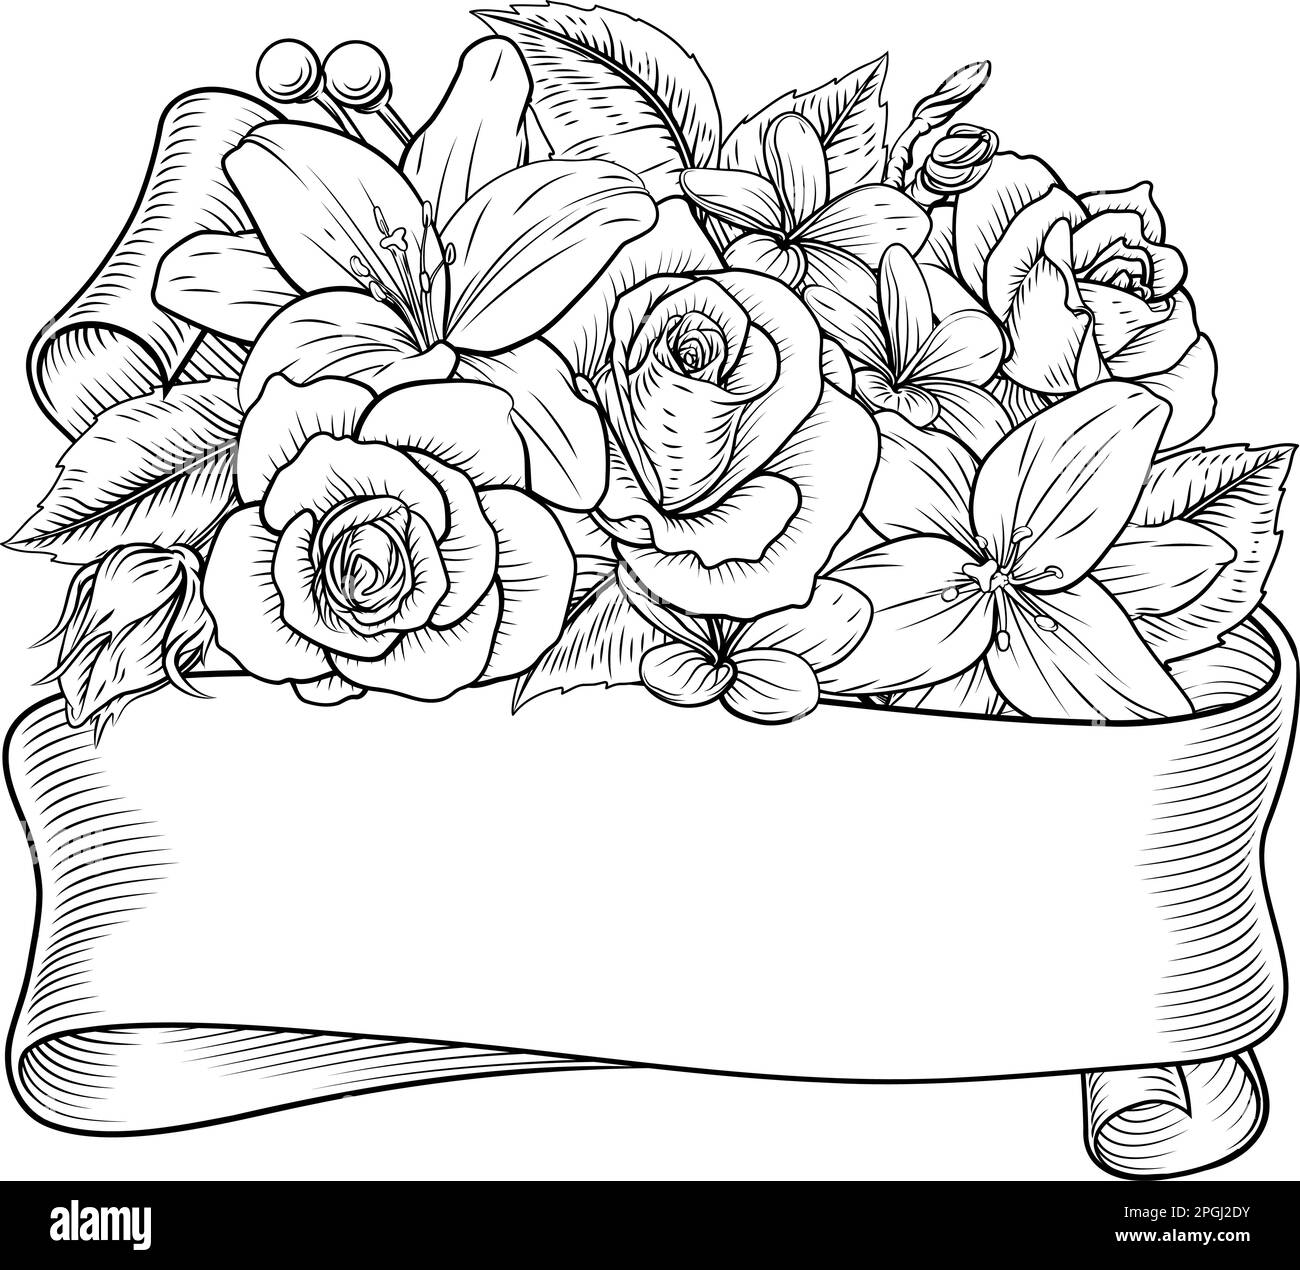 Flowers Floral Rose Bouquet Scroll Funeral Wedding Stock Vector